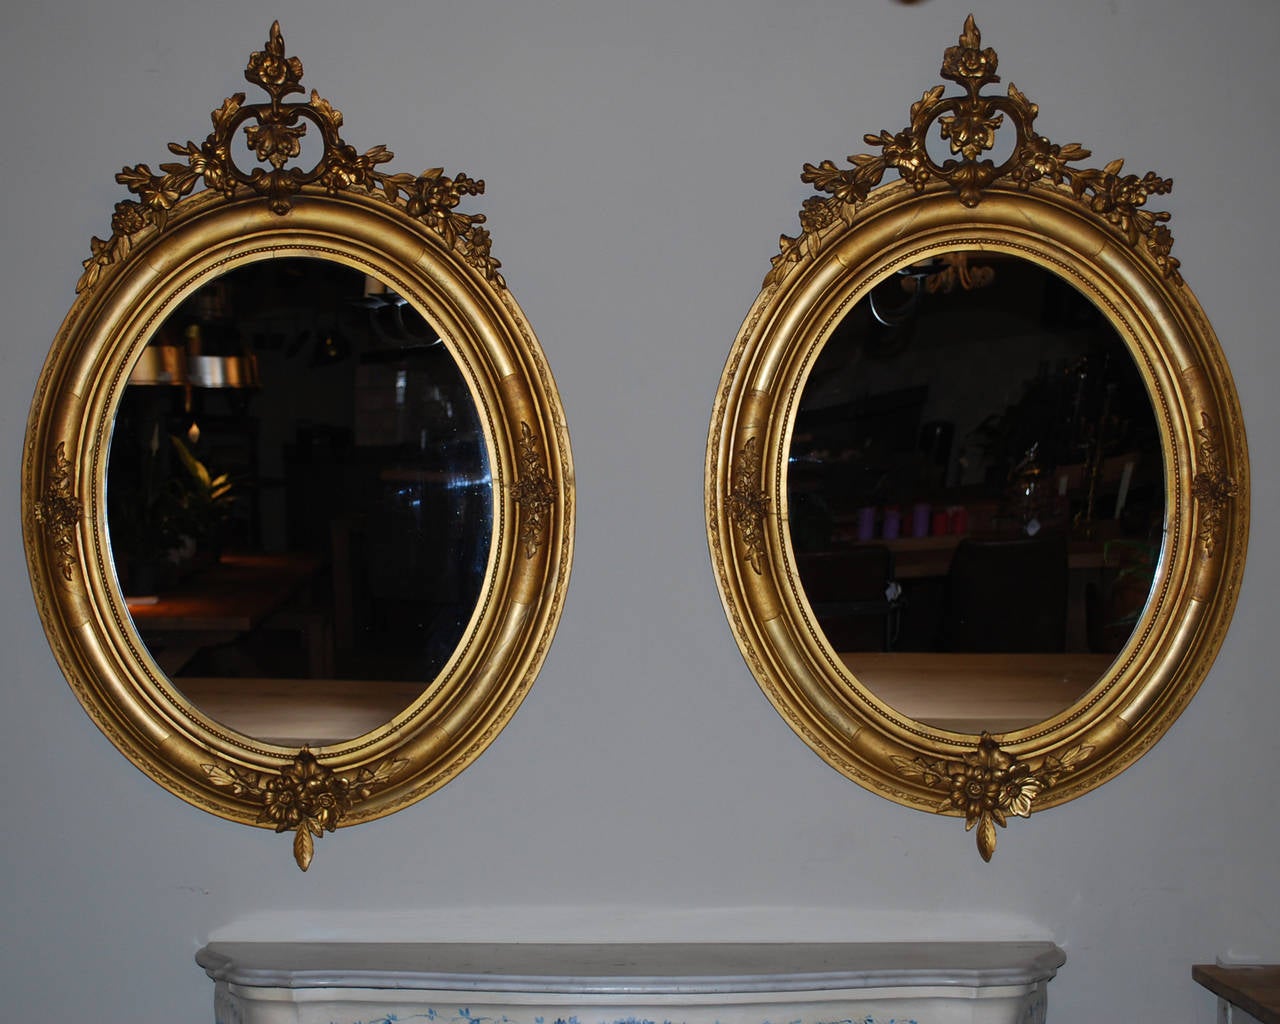 Pair of gold gilded oval mirrors with floral ornaments on the frame and in the corniche. New glass.
Originates in the south of France, dating app. 1850.